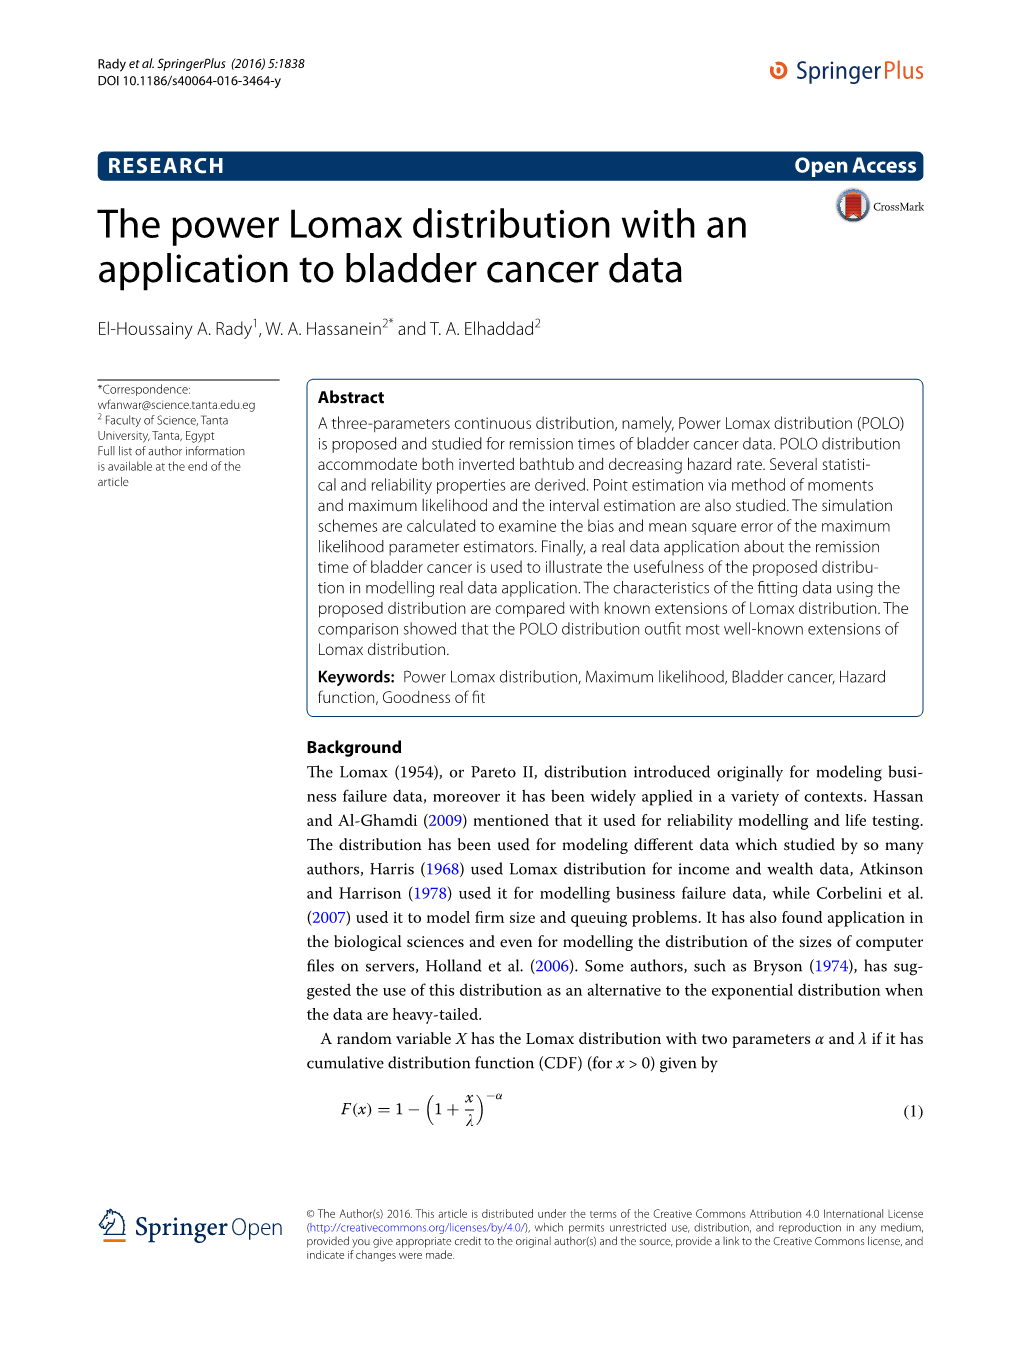 The Power Lomax Distribution with an Application to Bladder Cancer Data